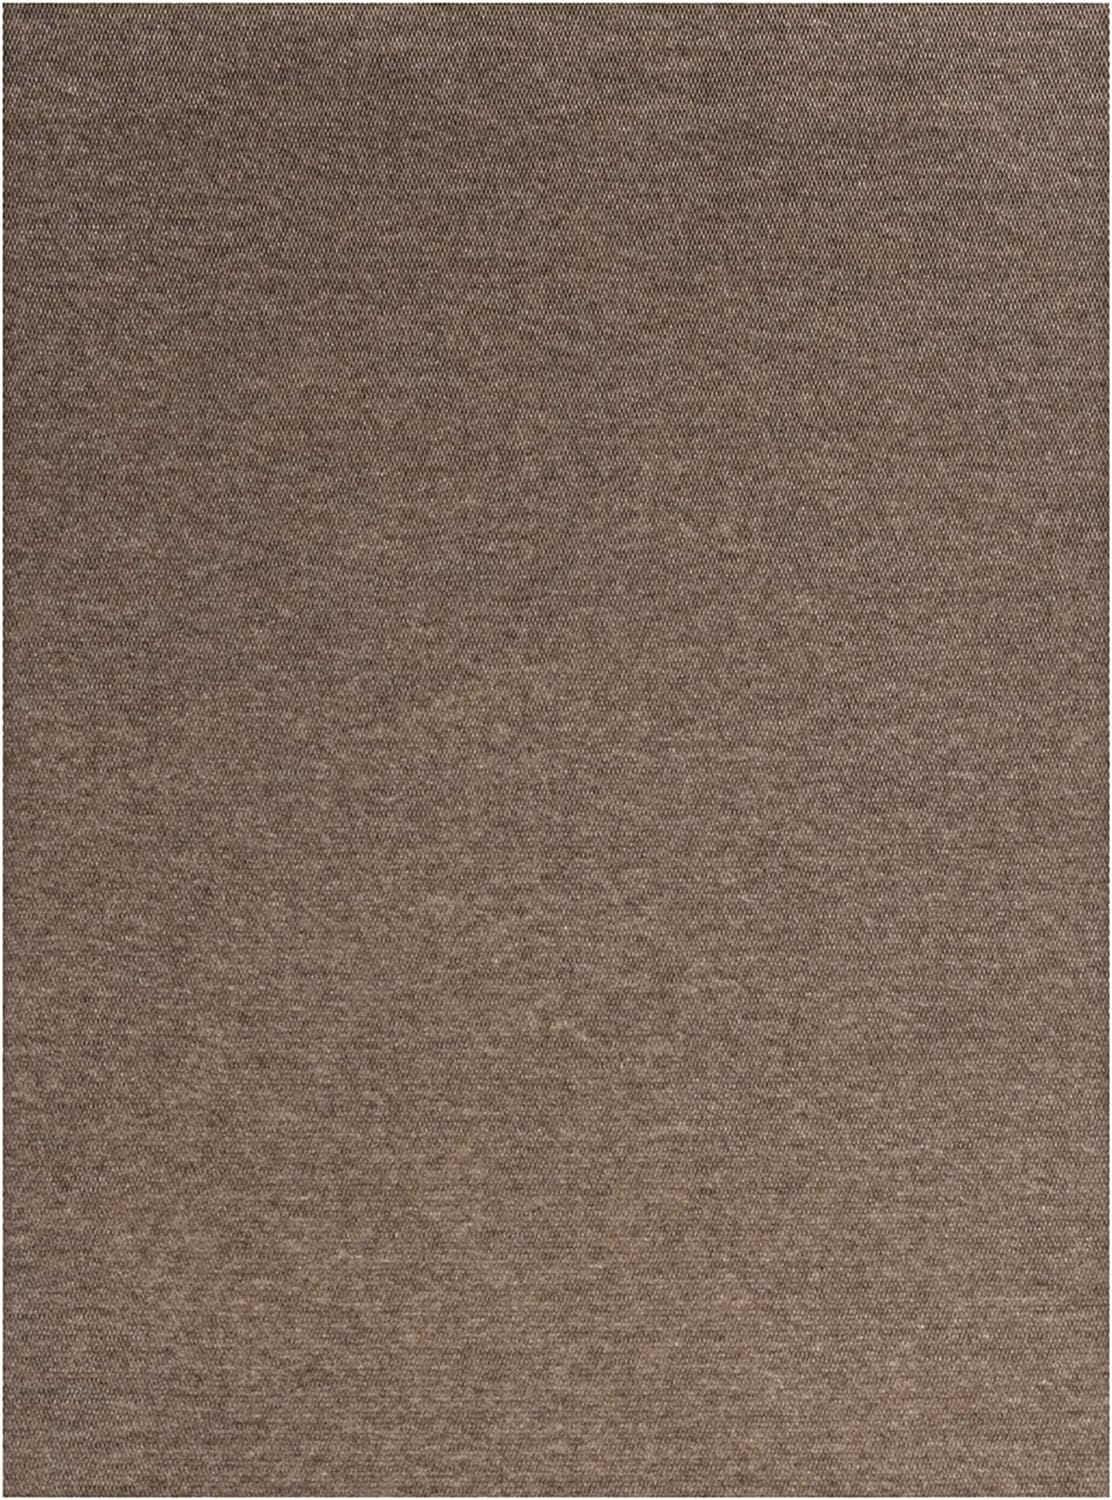 Koeckritz Rugs Hobnail Design Durable Outdoor Area Rugs Constructed with Superior Soft PET Fiber (Color: Espresso)